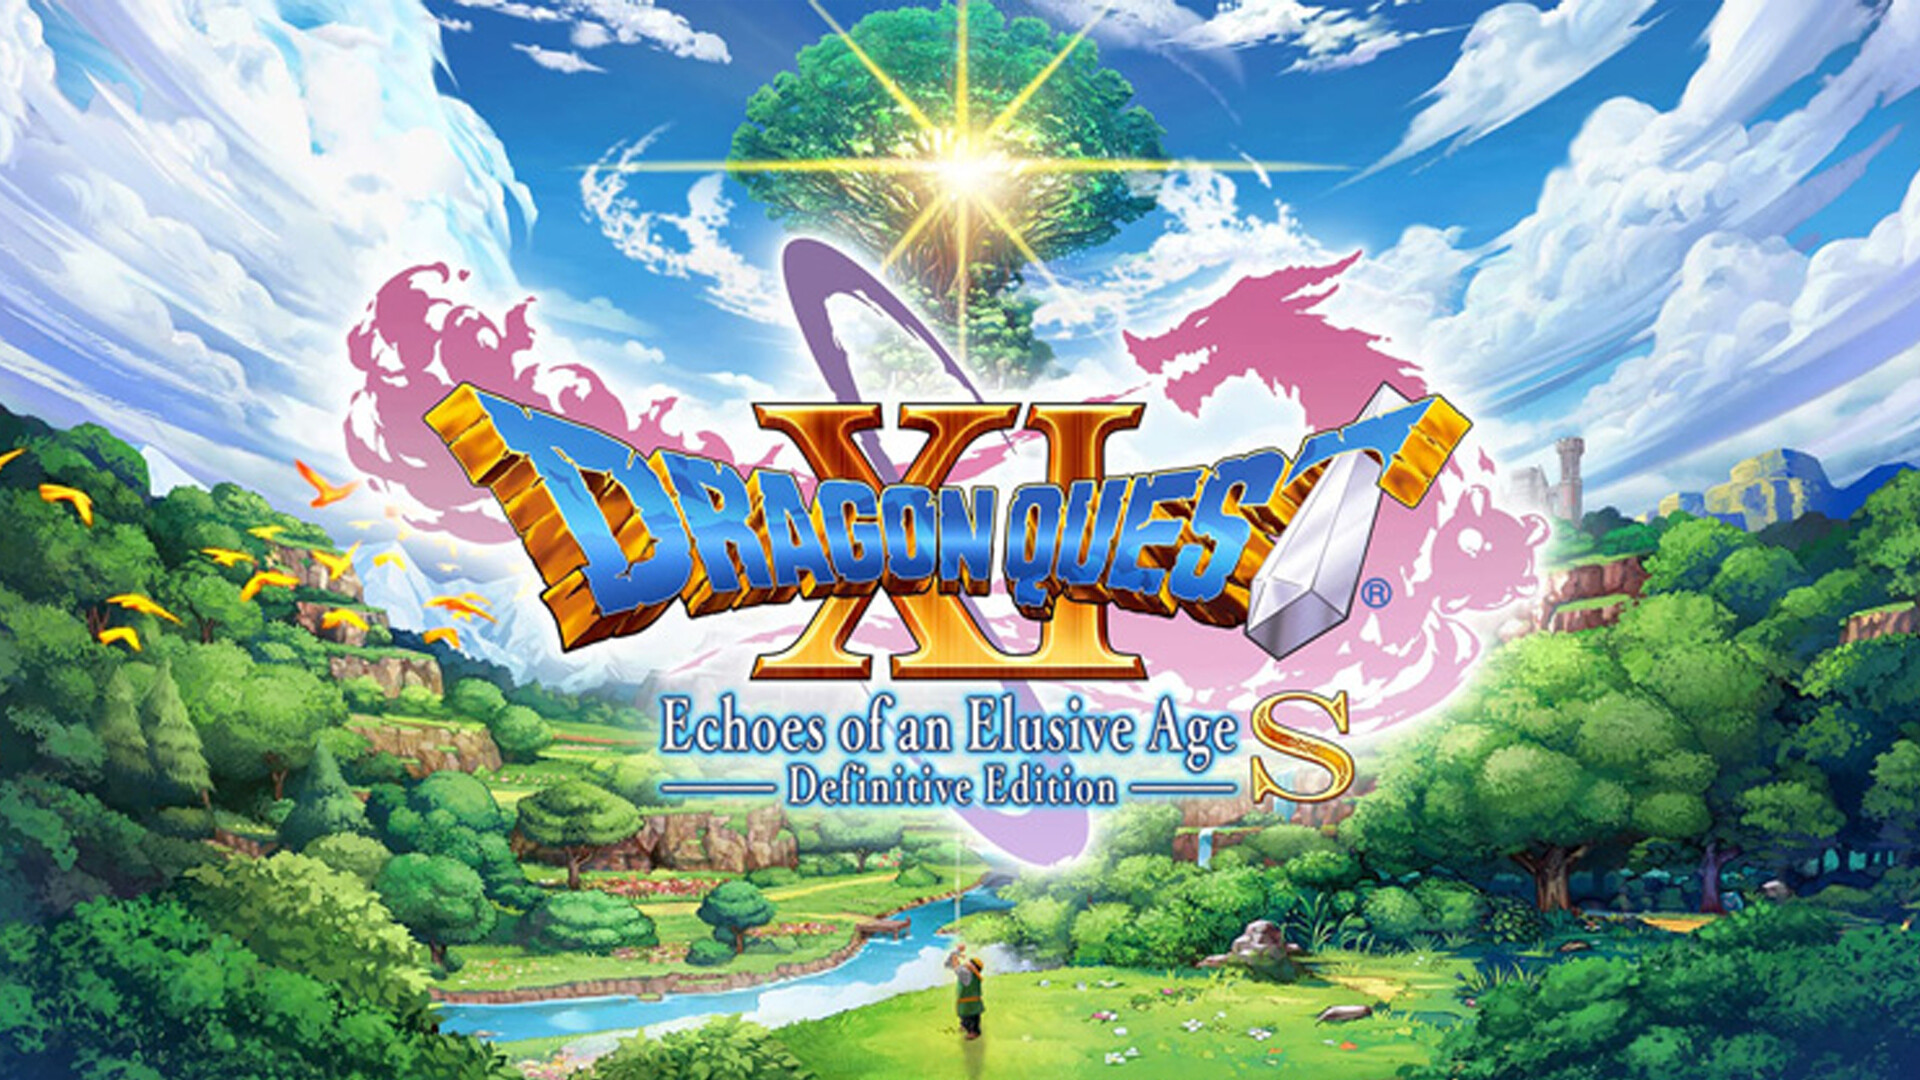 dragon-quest-xi-s-echoes-of-an-elusive-age-definitive-edition-review